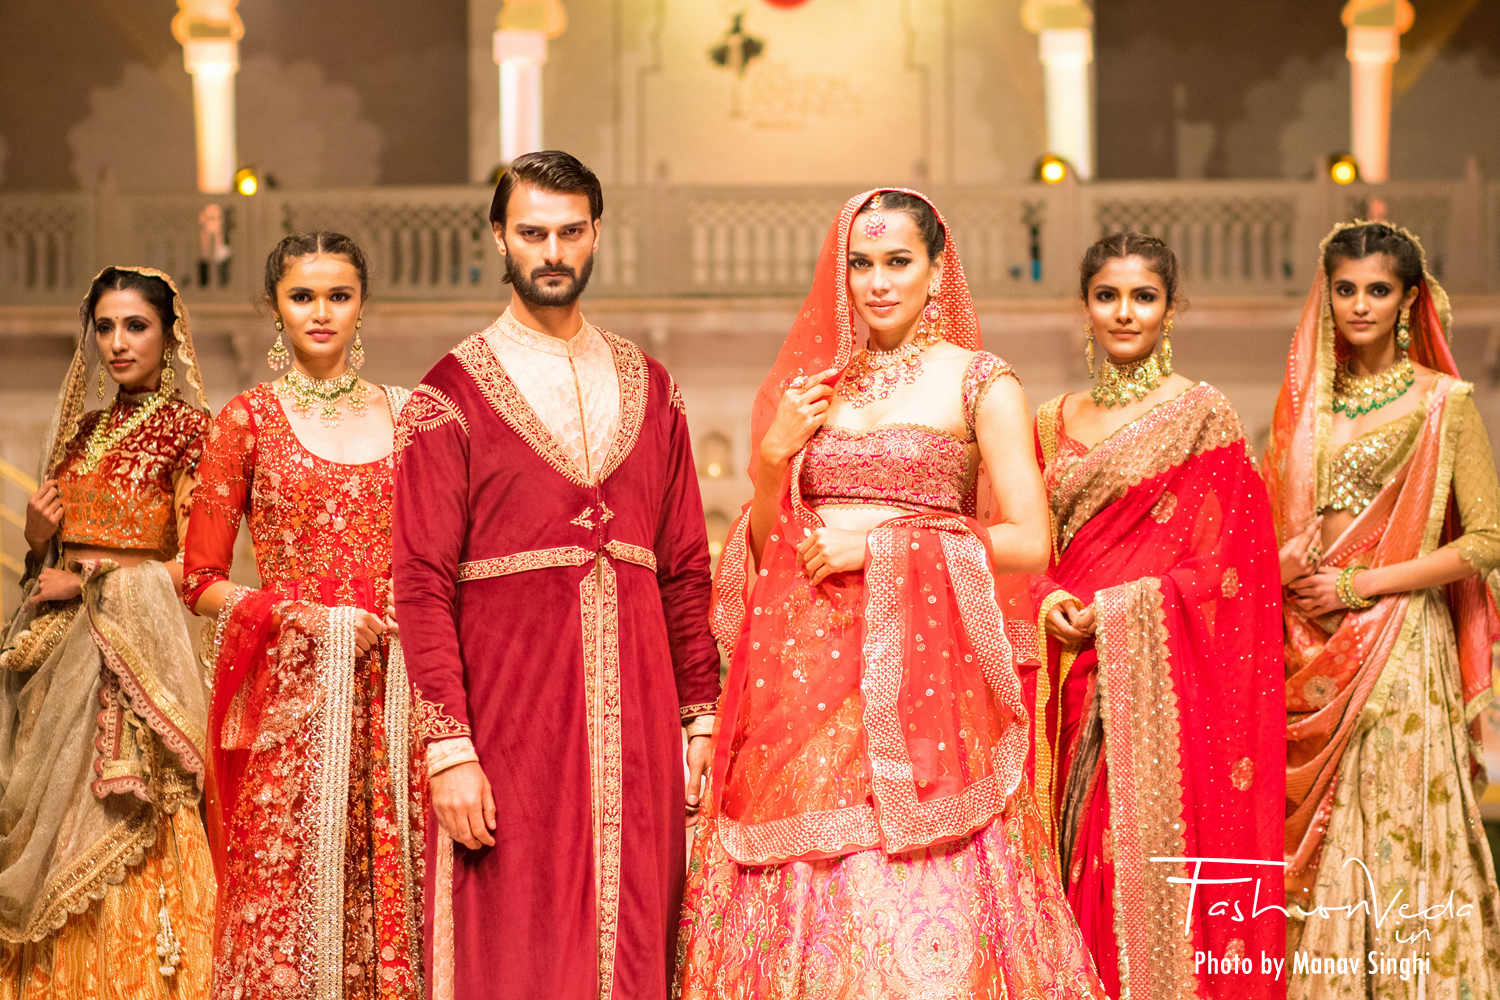 Collection by House of Kotwara at Fashion Connect Show, Jaipur.